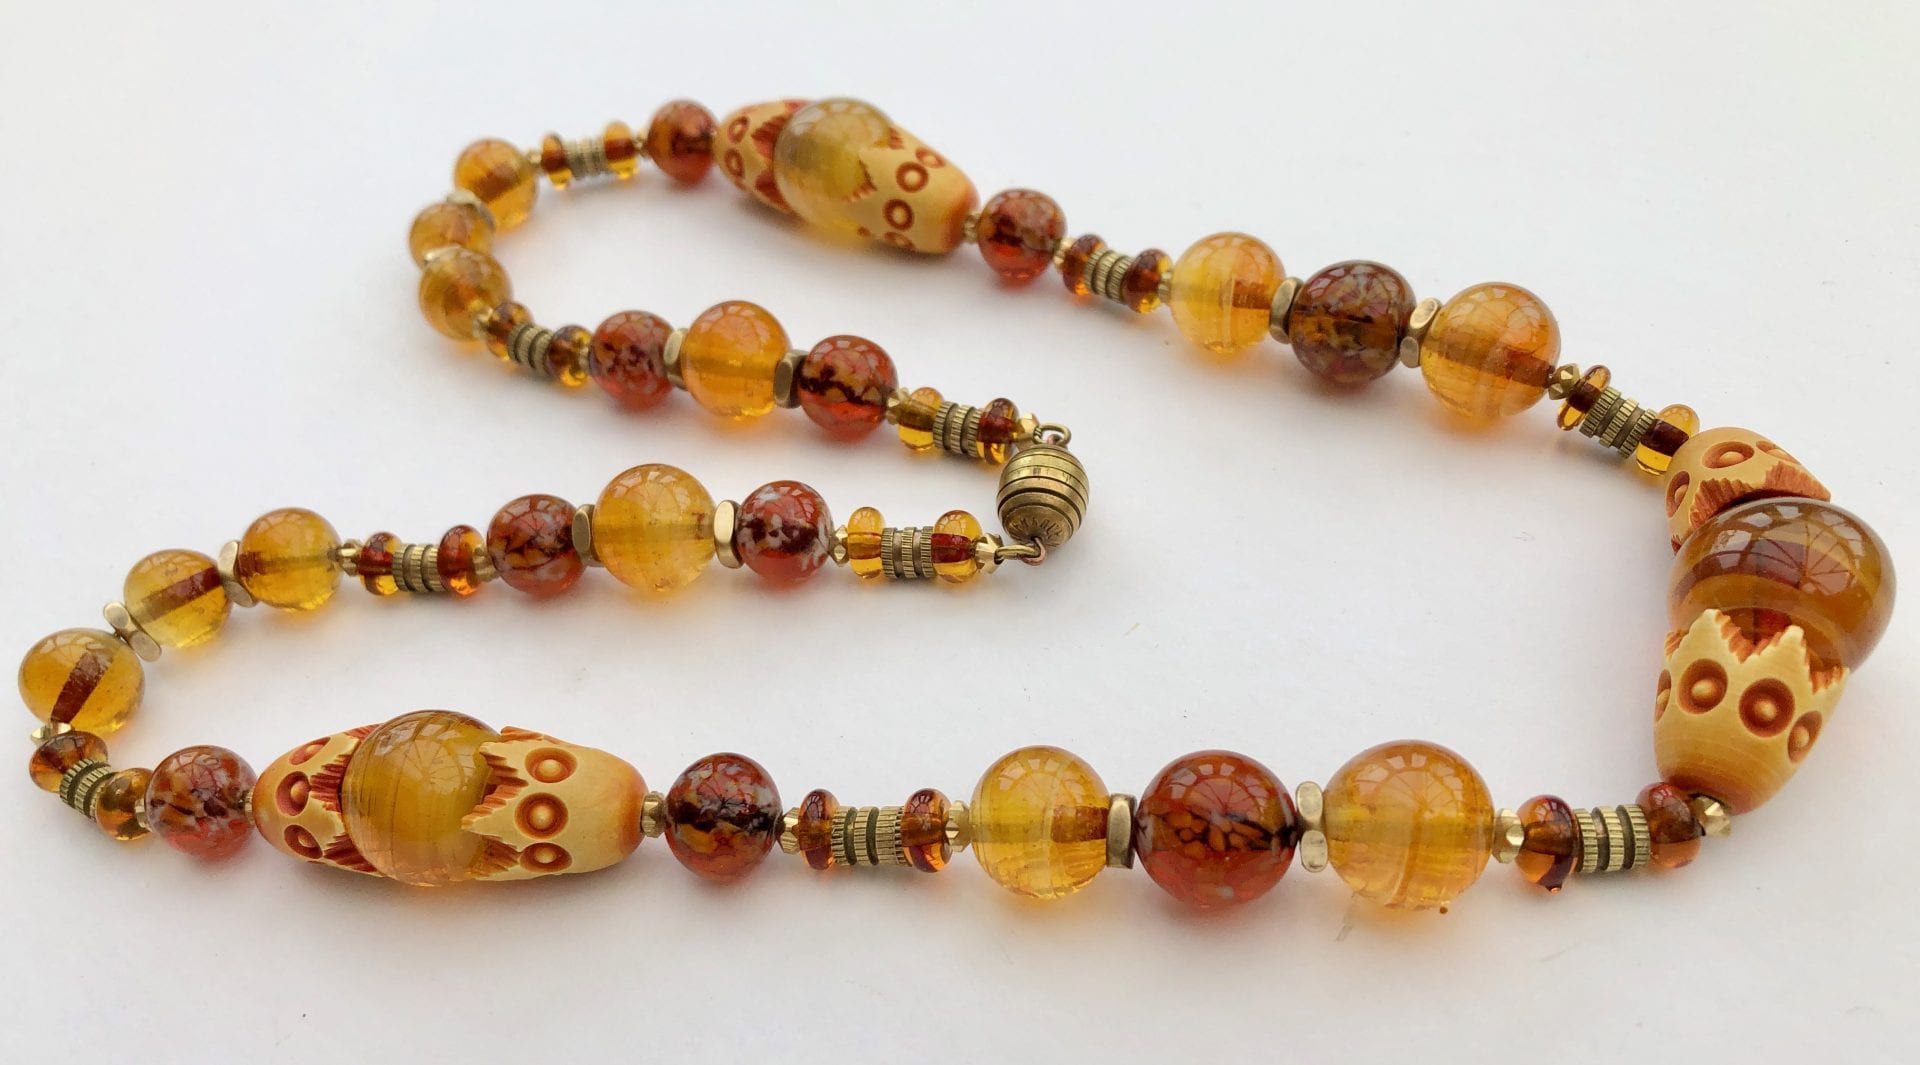 1930s Louis Rousselet Amber Necklace - SOLD - Jewels Past